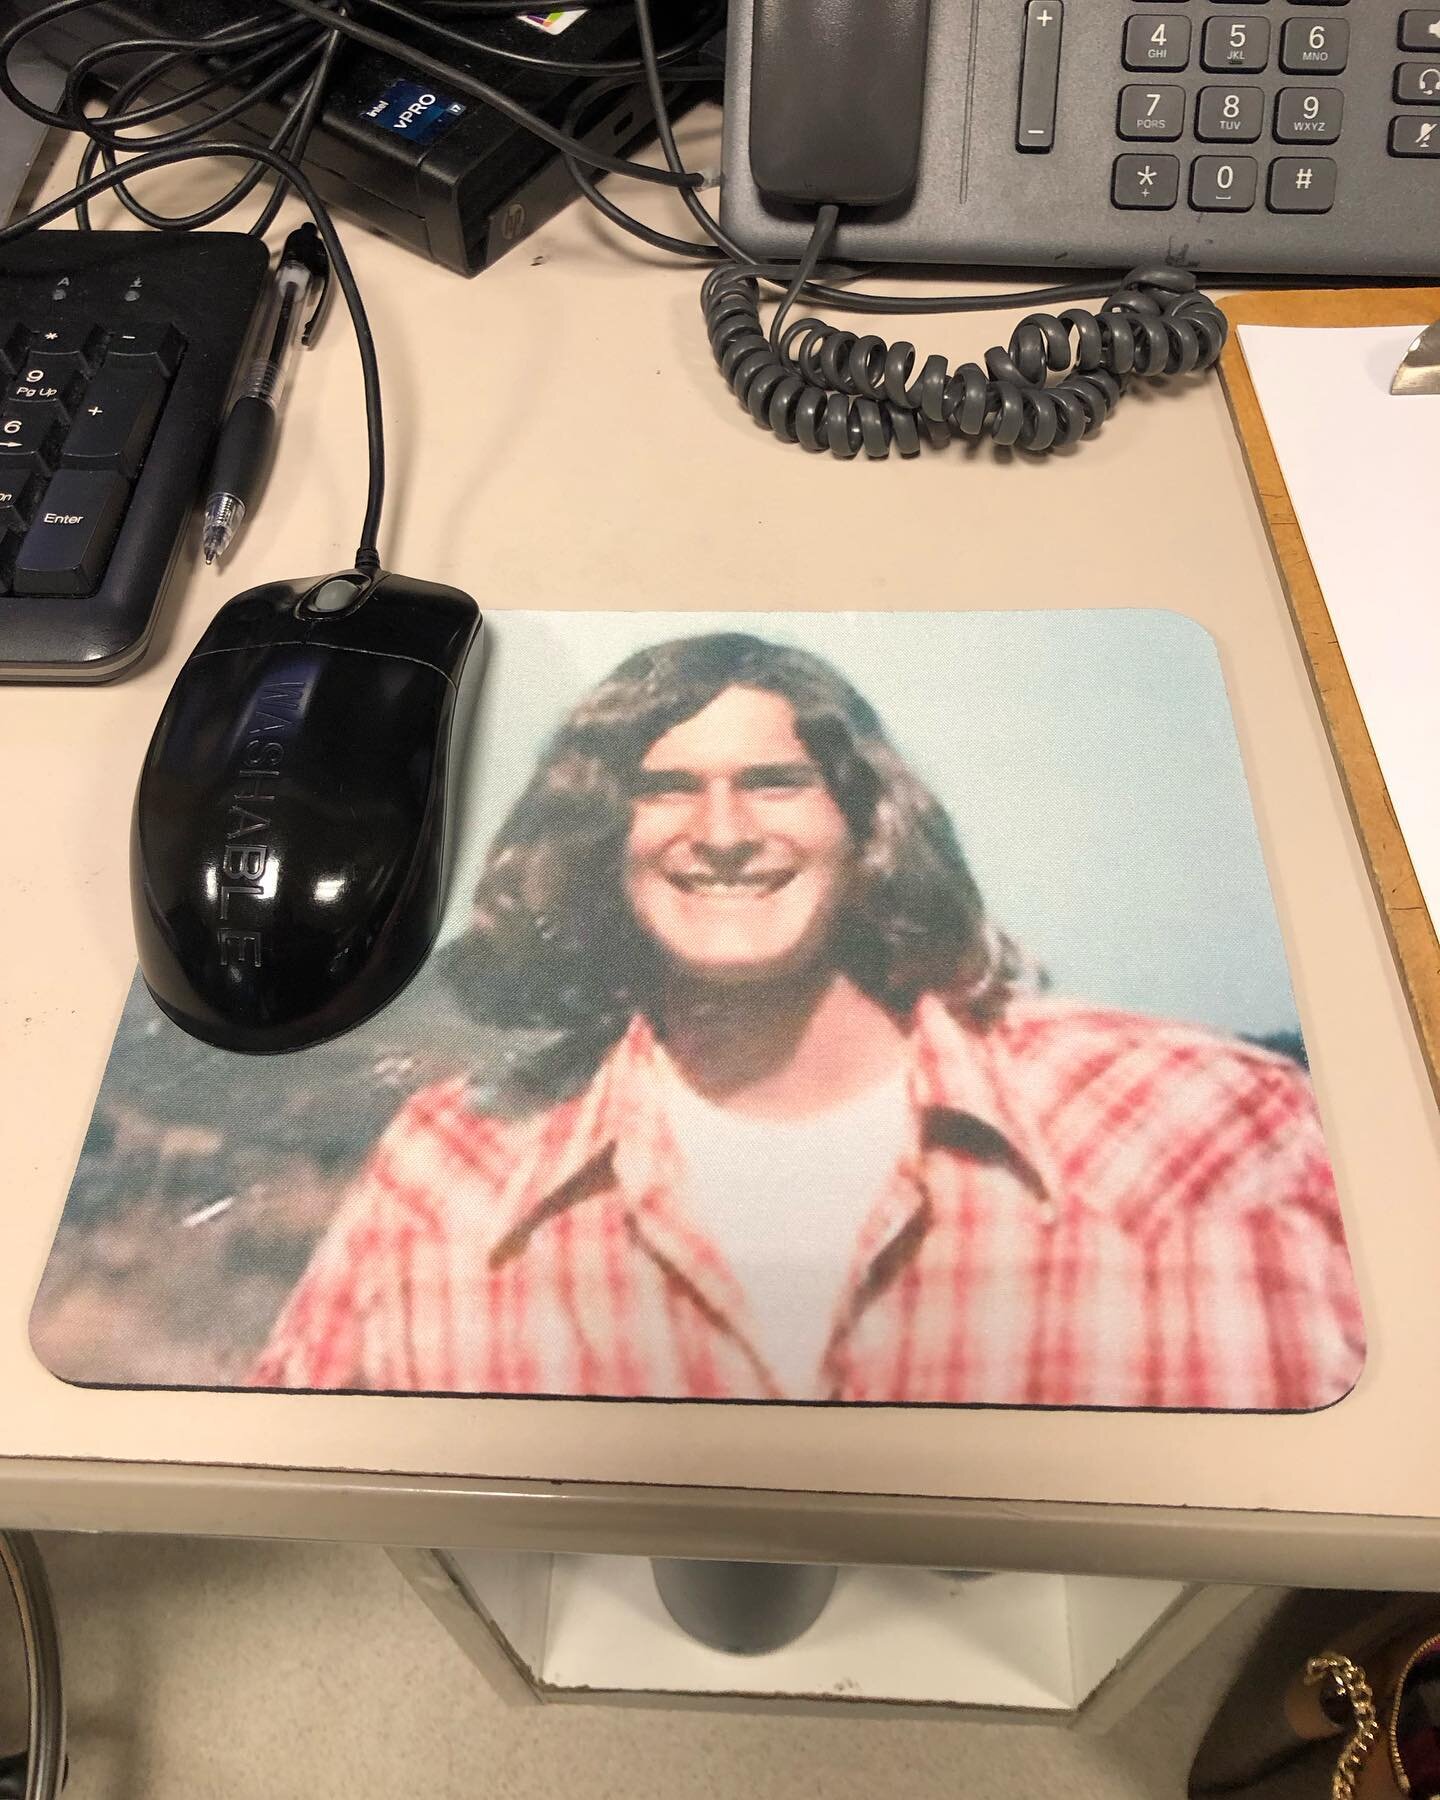 Mouse pad wars continued. Can you guess who this is? #emergencymedicine #emresidency